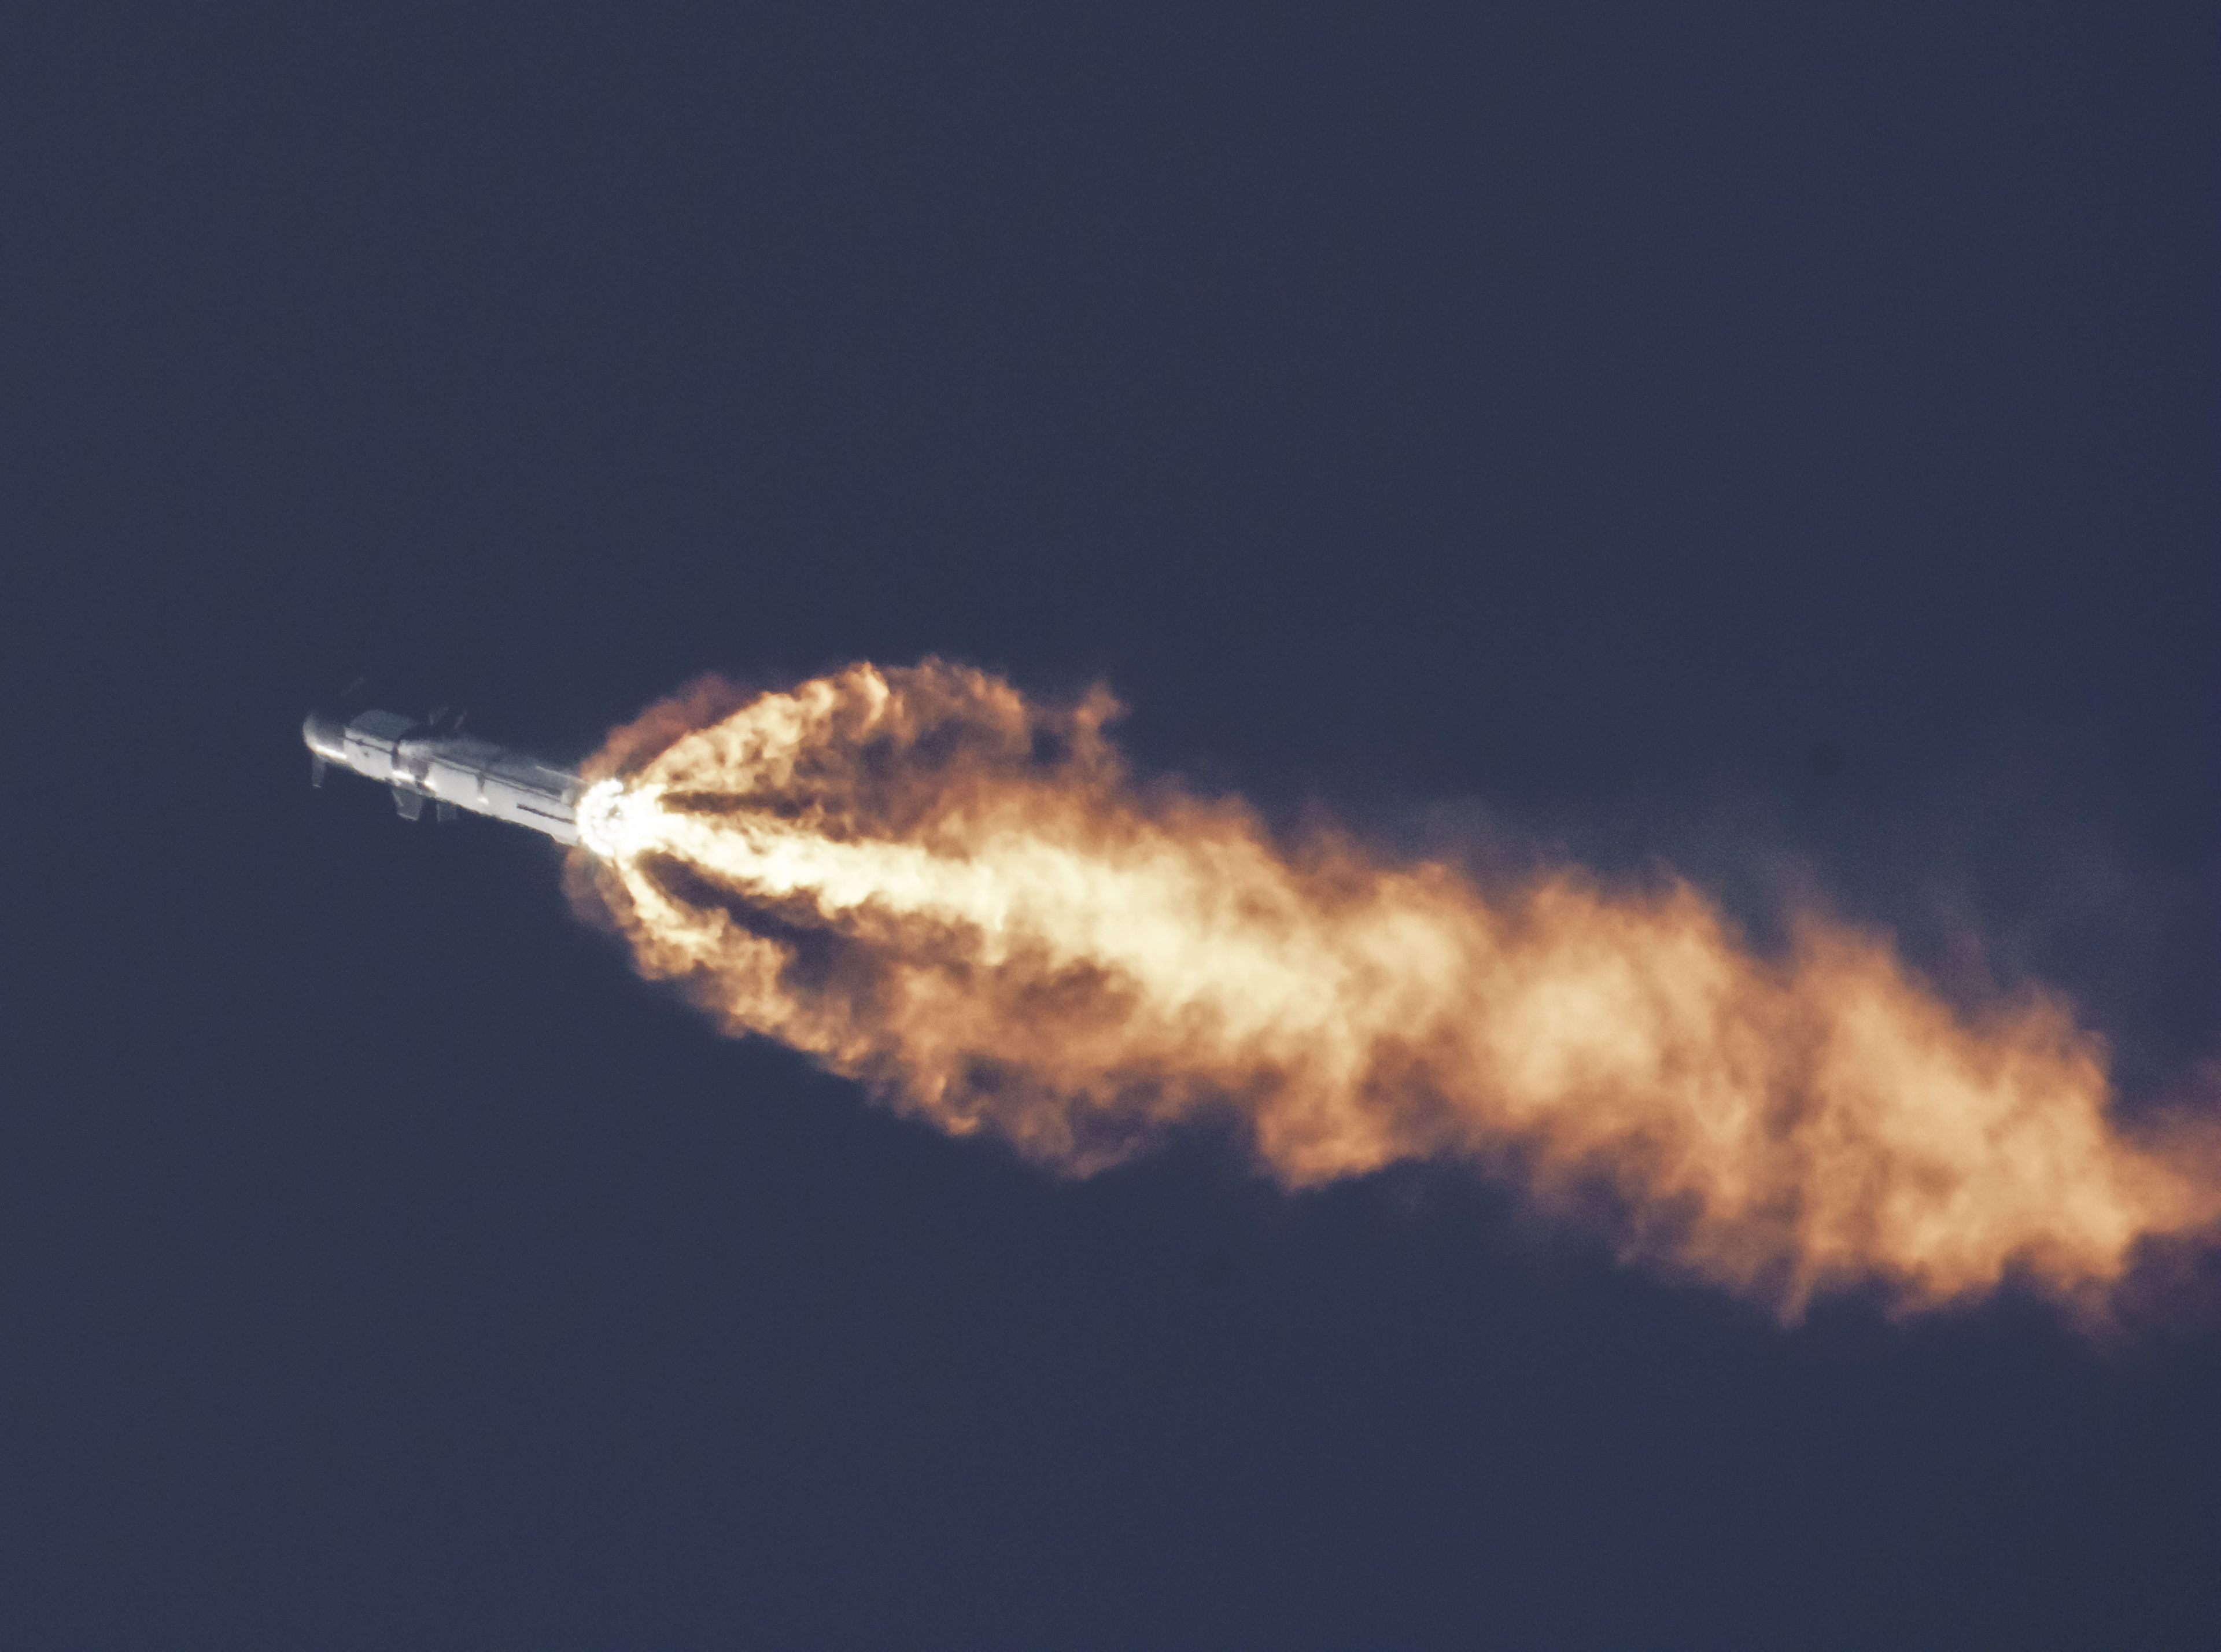 Elon Musk's SpaceX Starship rocket and spacecraft lost in second test  flight